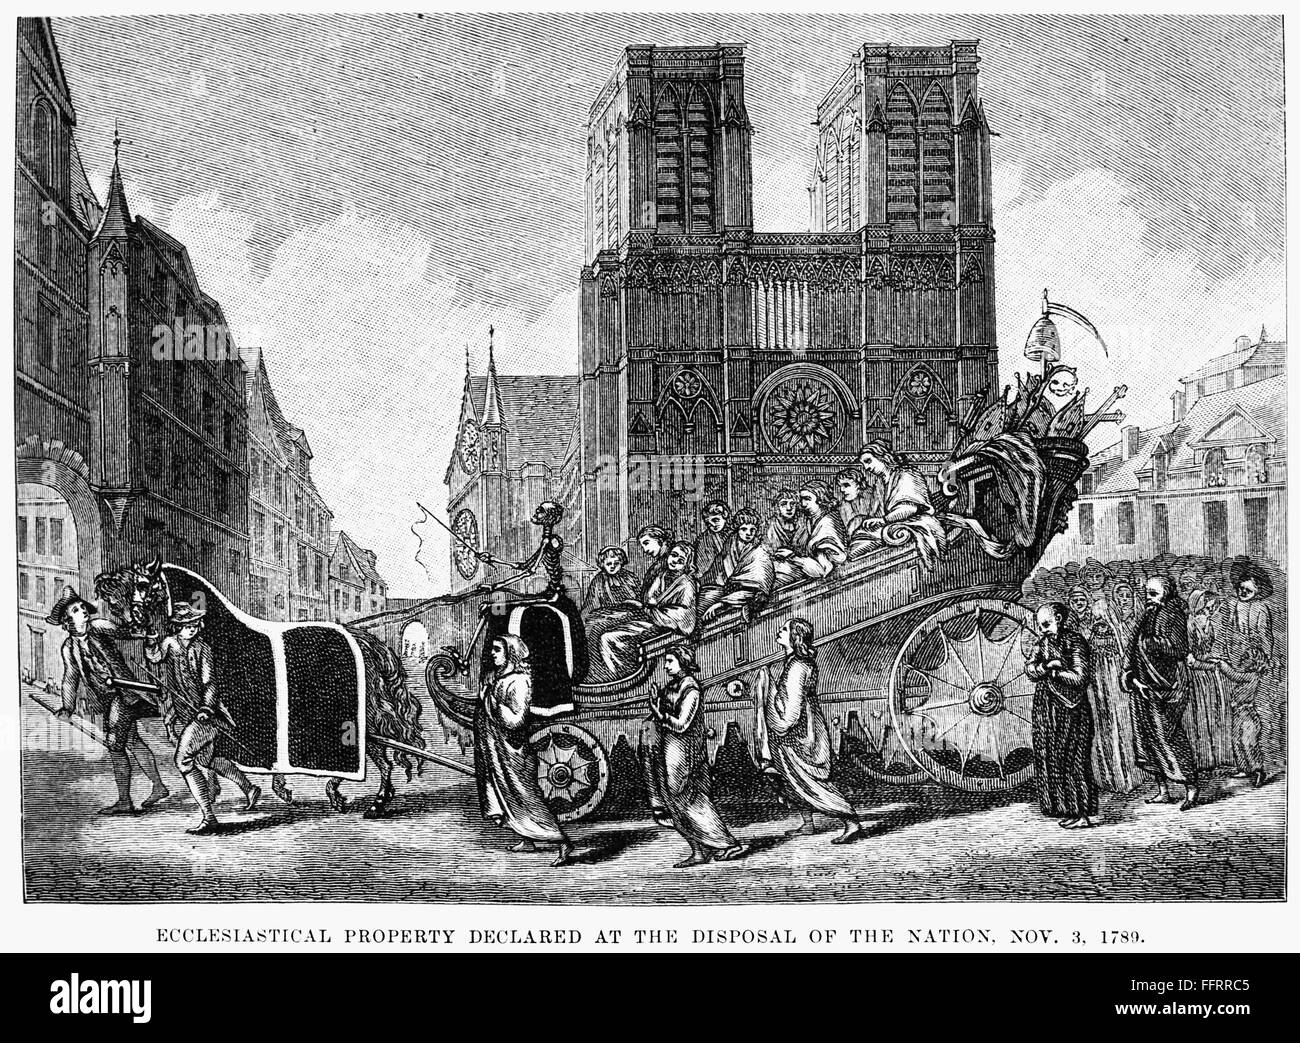 ECCLESIASTICAL PROPERTY. /n'The burial of the very high, very powerful Sir Clergyman, who died in the National Assembly, 3 November 1789.' English cartoon, 1889, reprinted in France, commenting on the nationalization of ecclesiastical property during the Stock Photo